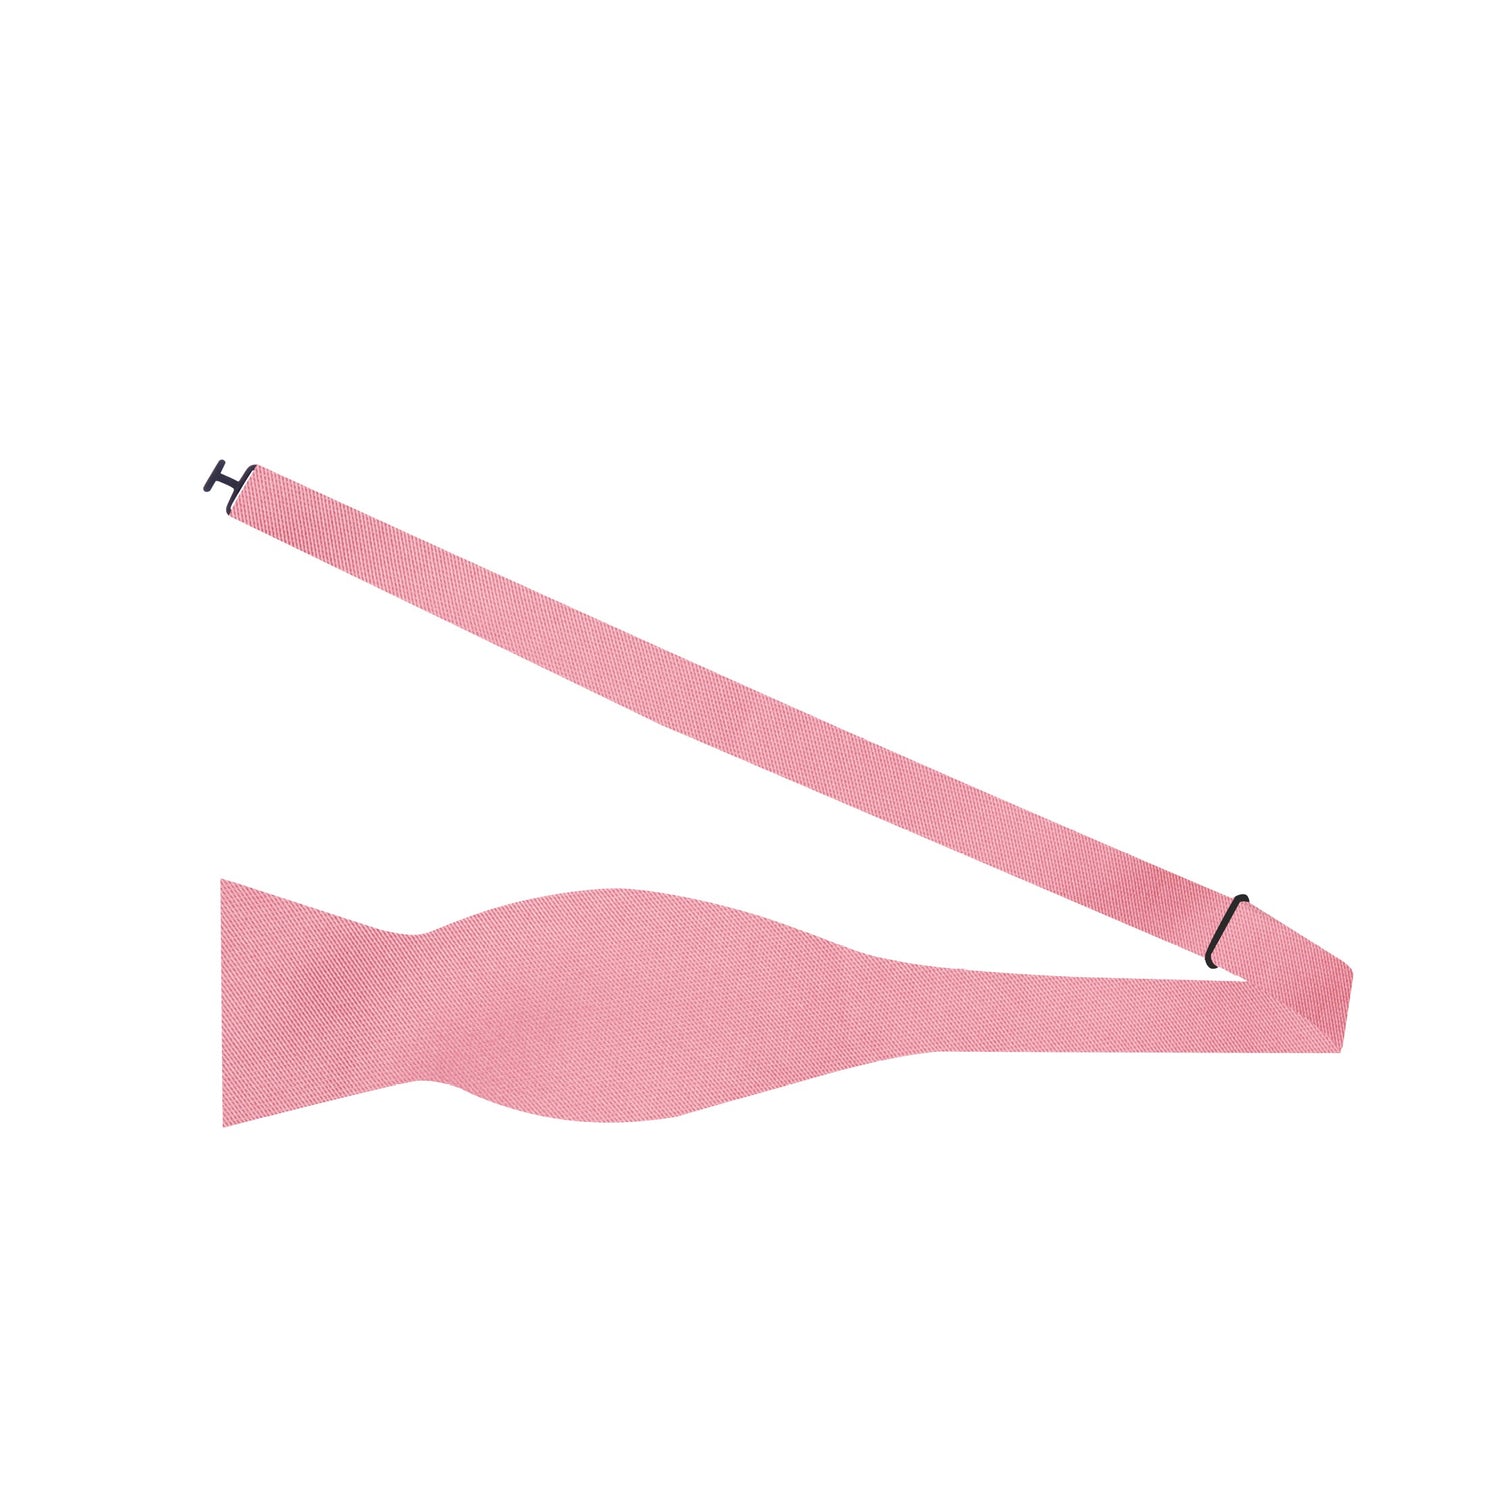 Self Tie: Solid Glossy Salmon Pink Bow Tie